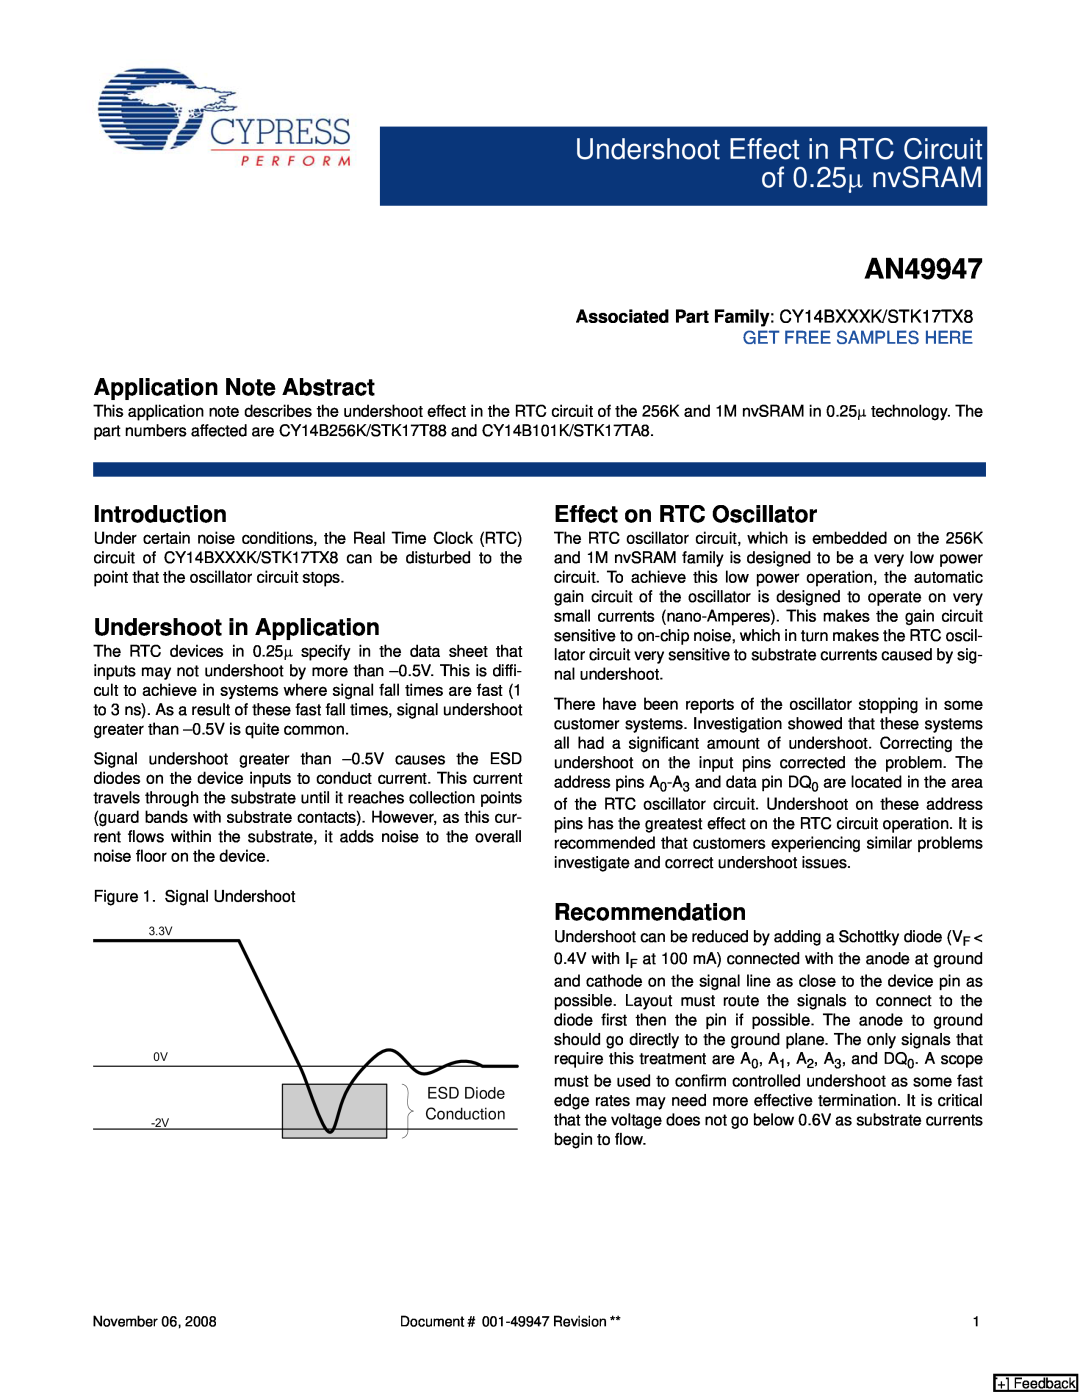 Cypress AN49947 manual Application Note Abstract, Introduction, Undershoot in Application, Effect on RTC Oscillator 